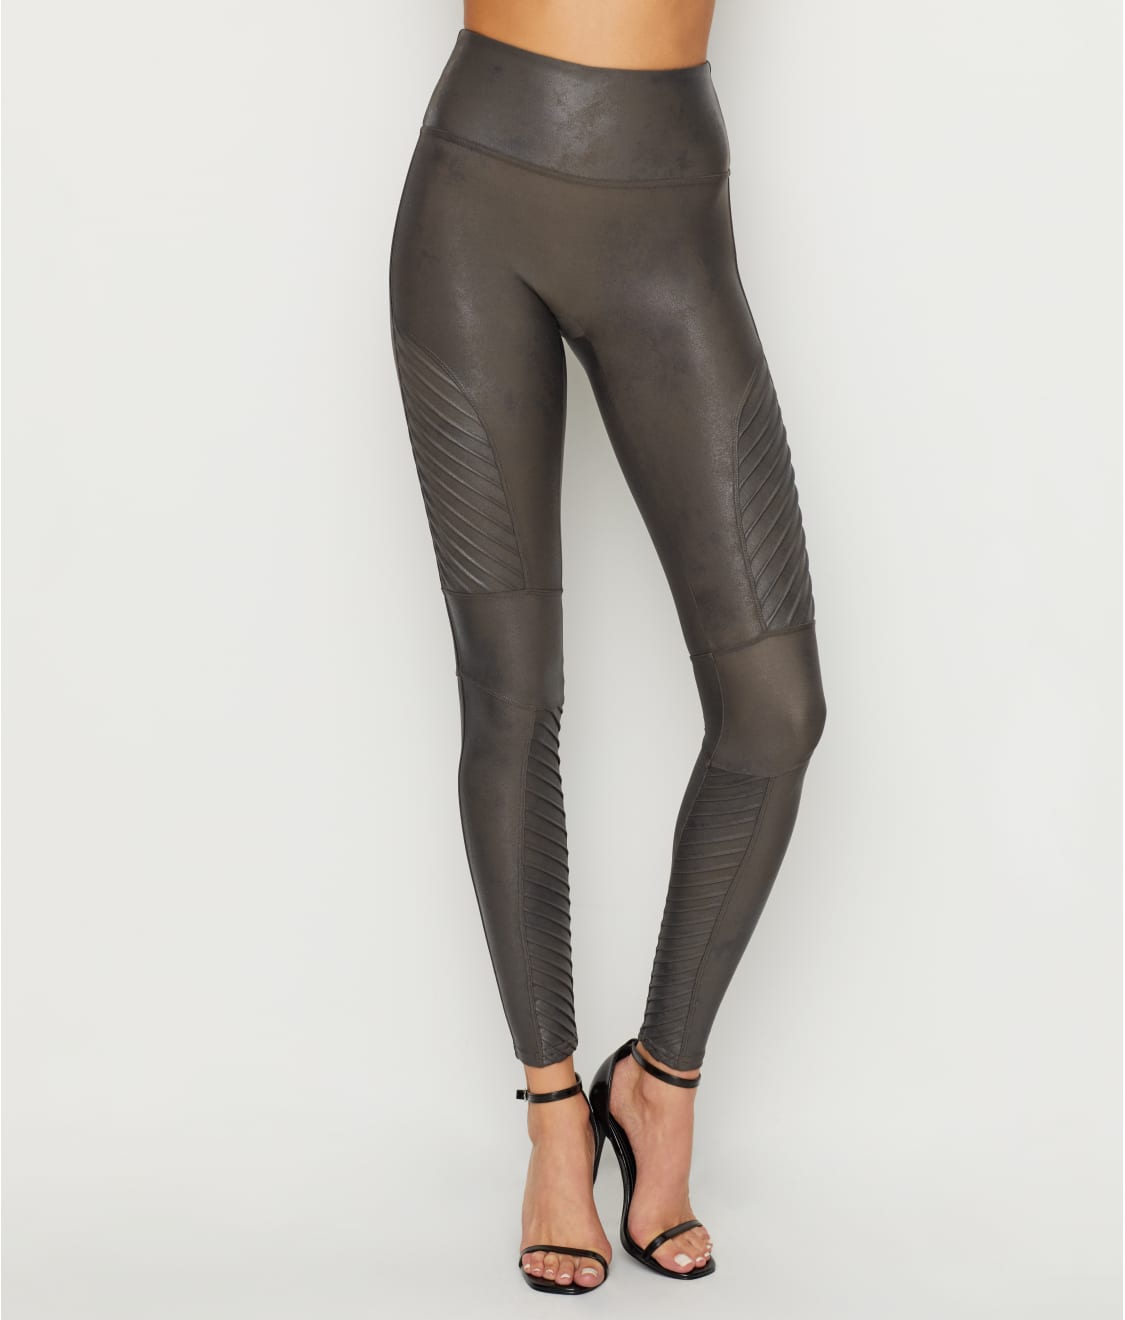 Riding Leggings For Women With Phone Pocket